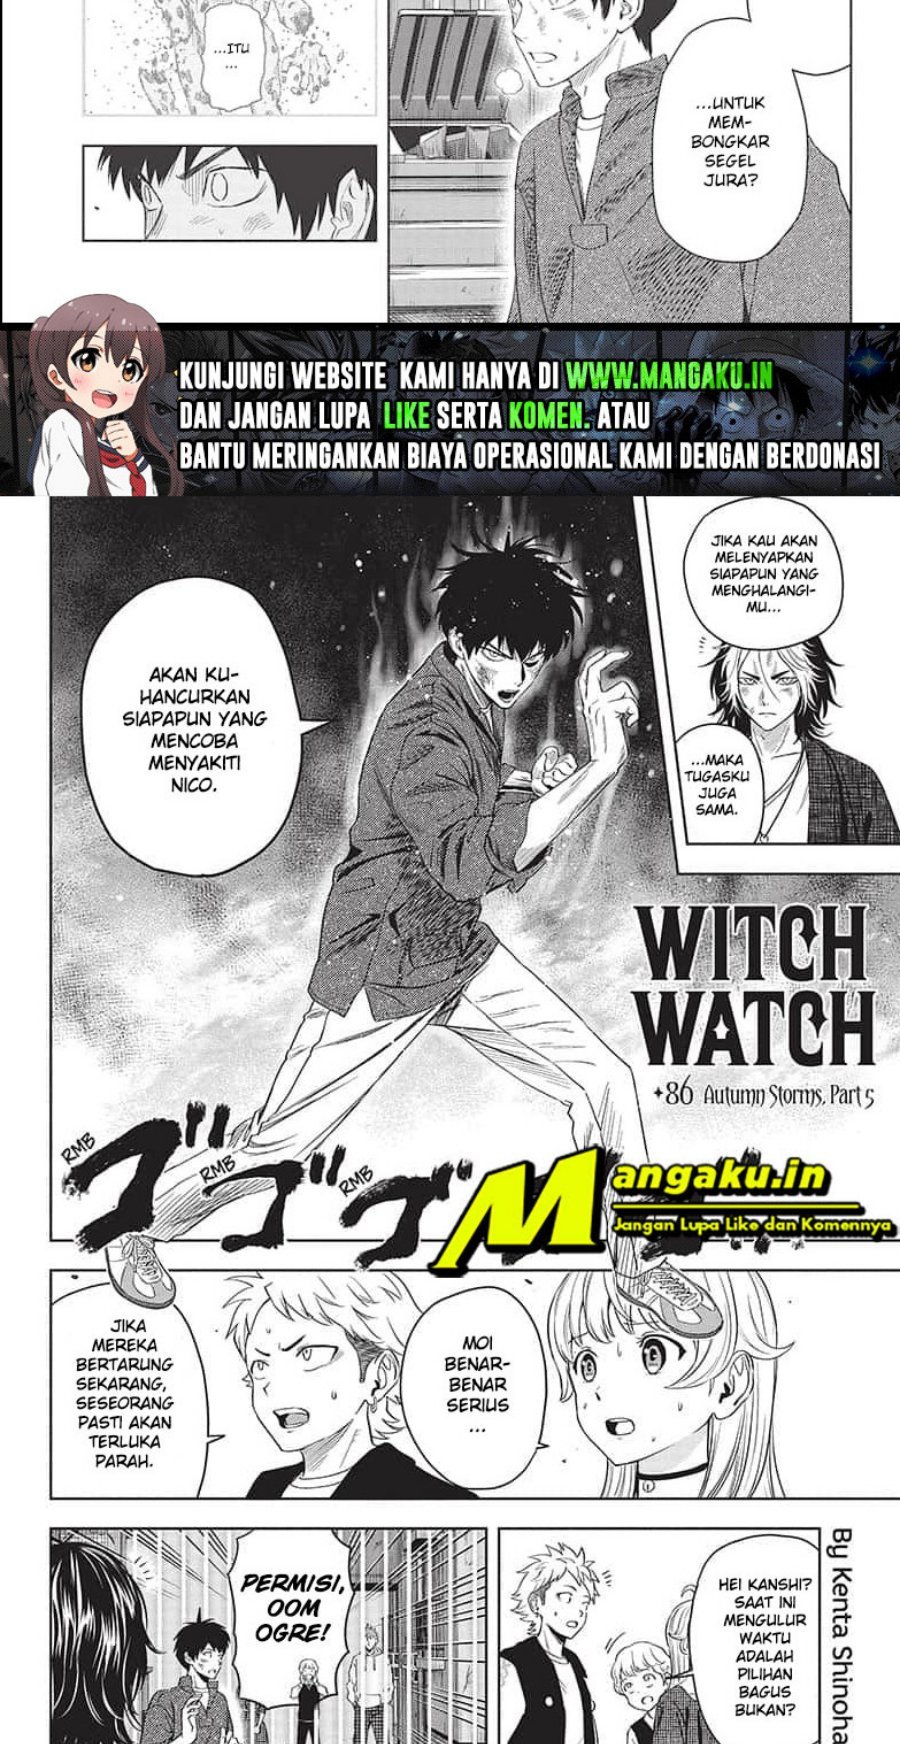 Witch Watch Chapter 86 2